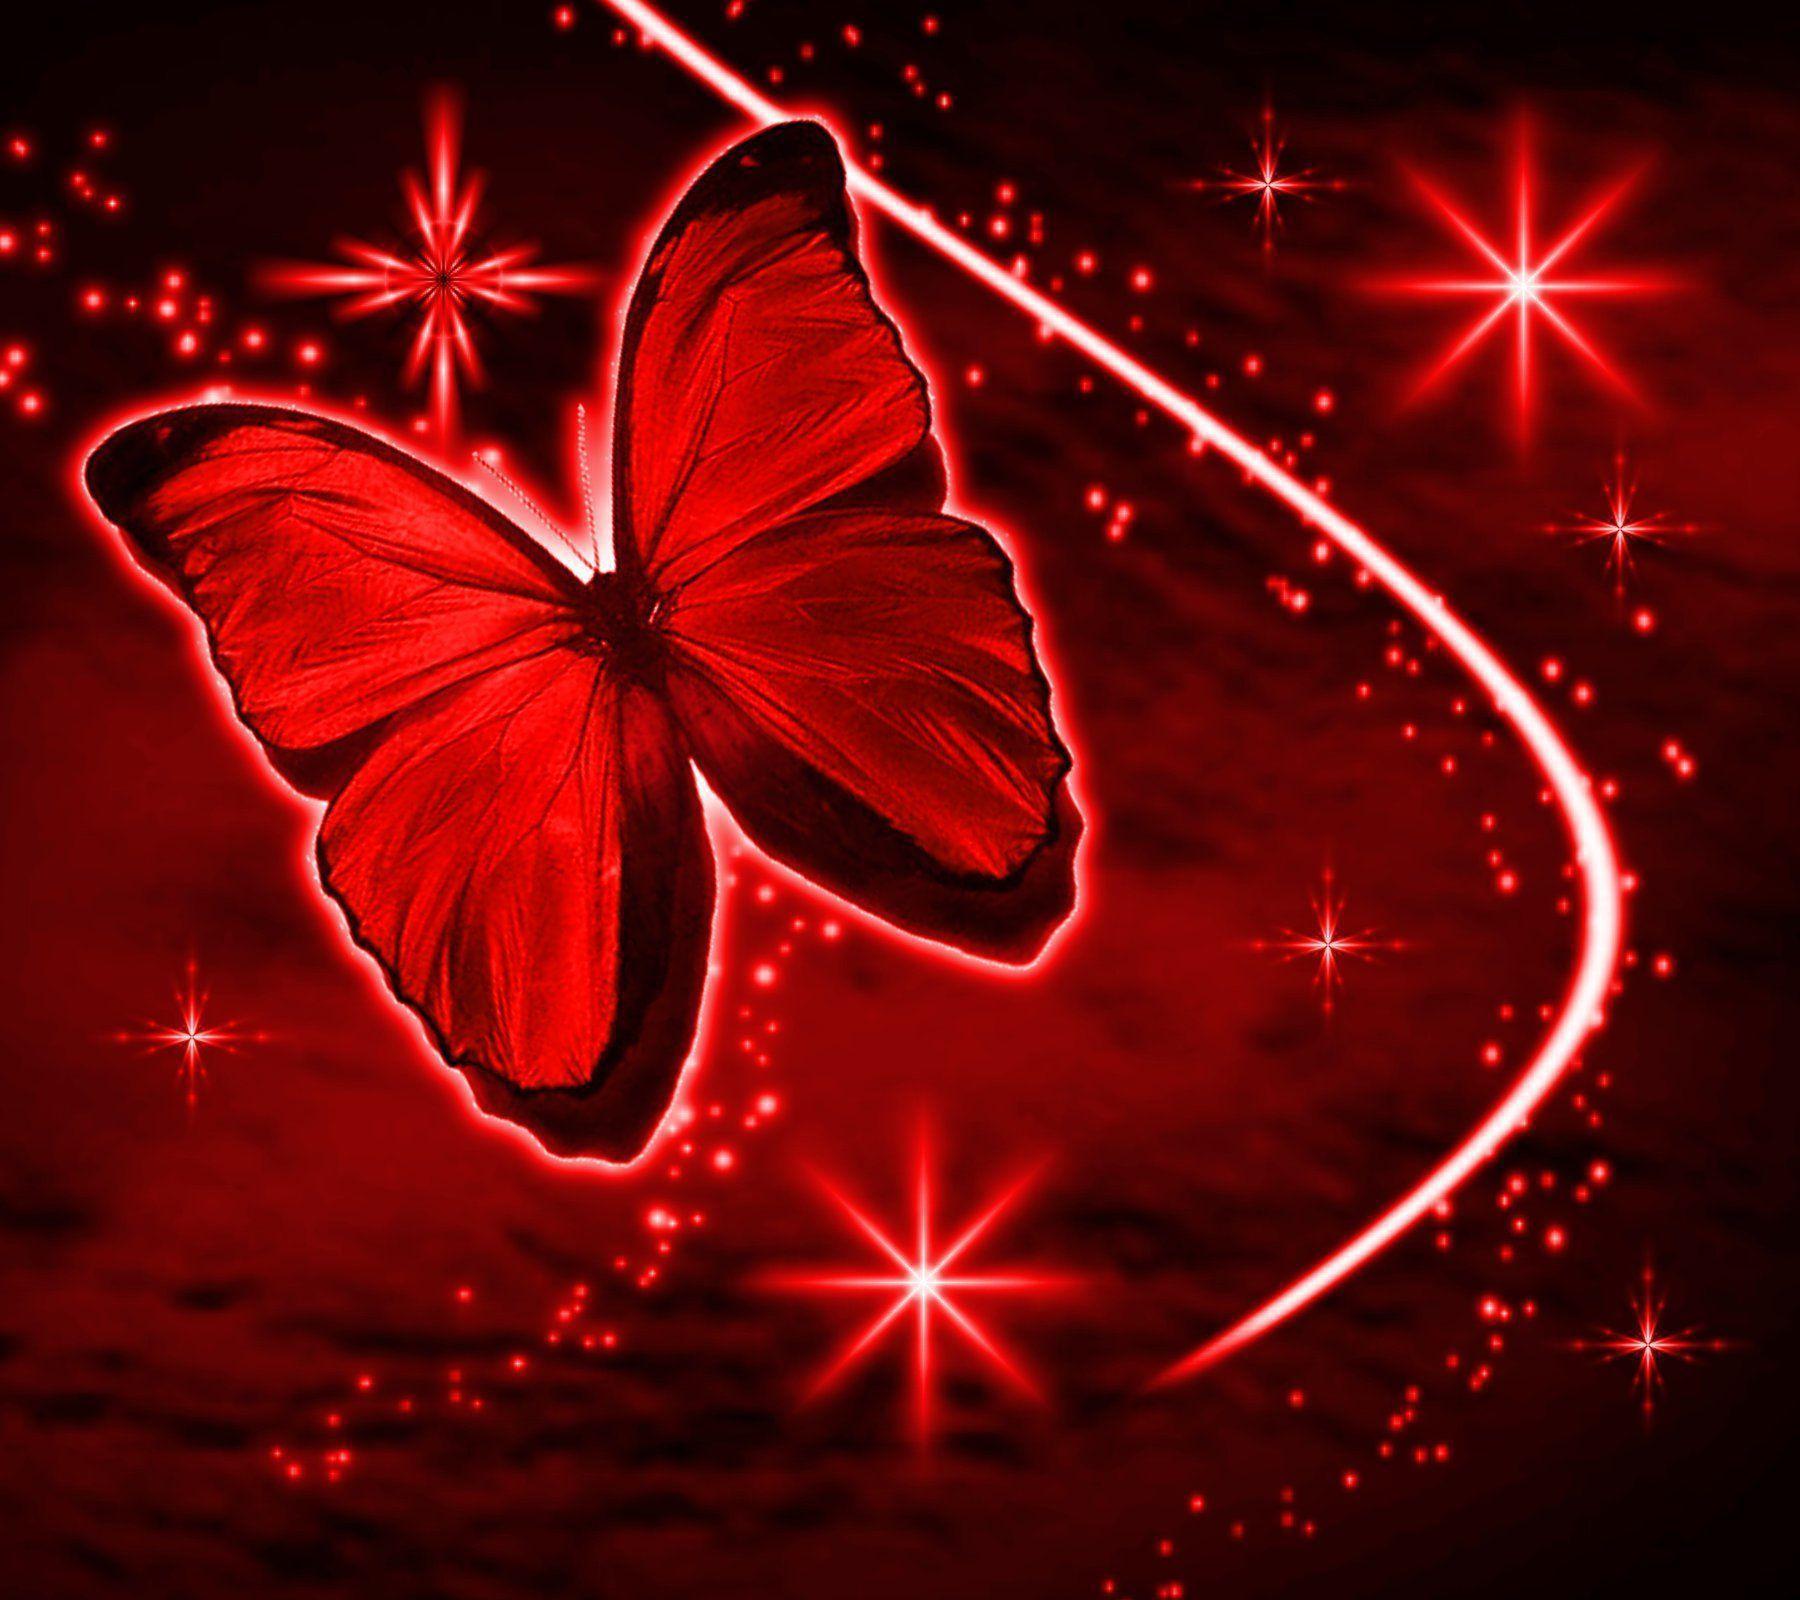 Red Butterfly Wallpapers Wallpaper Cave